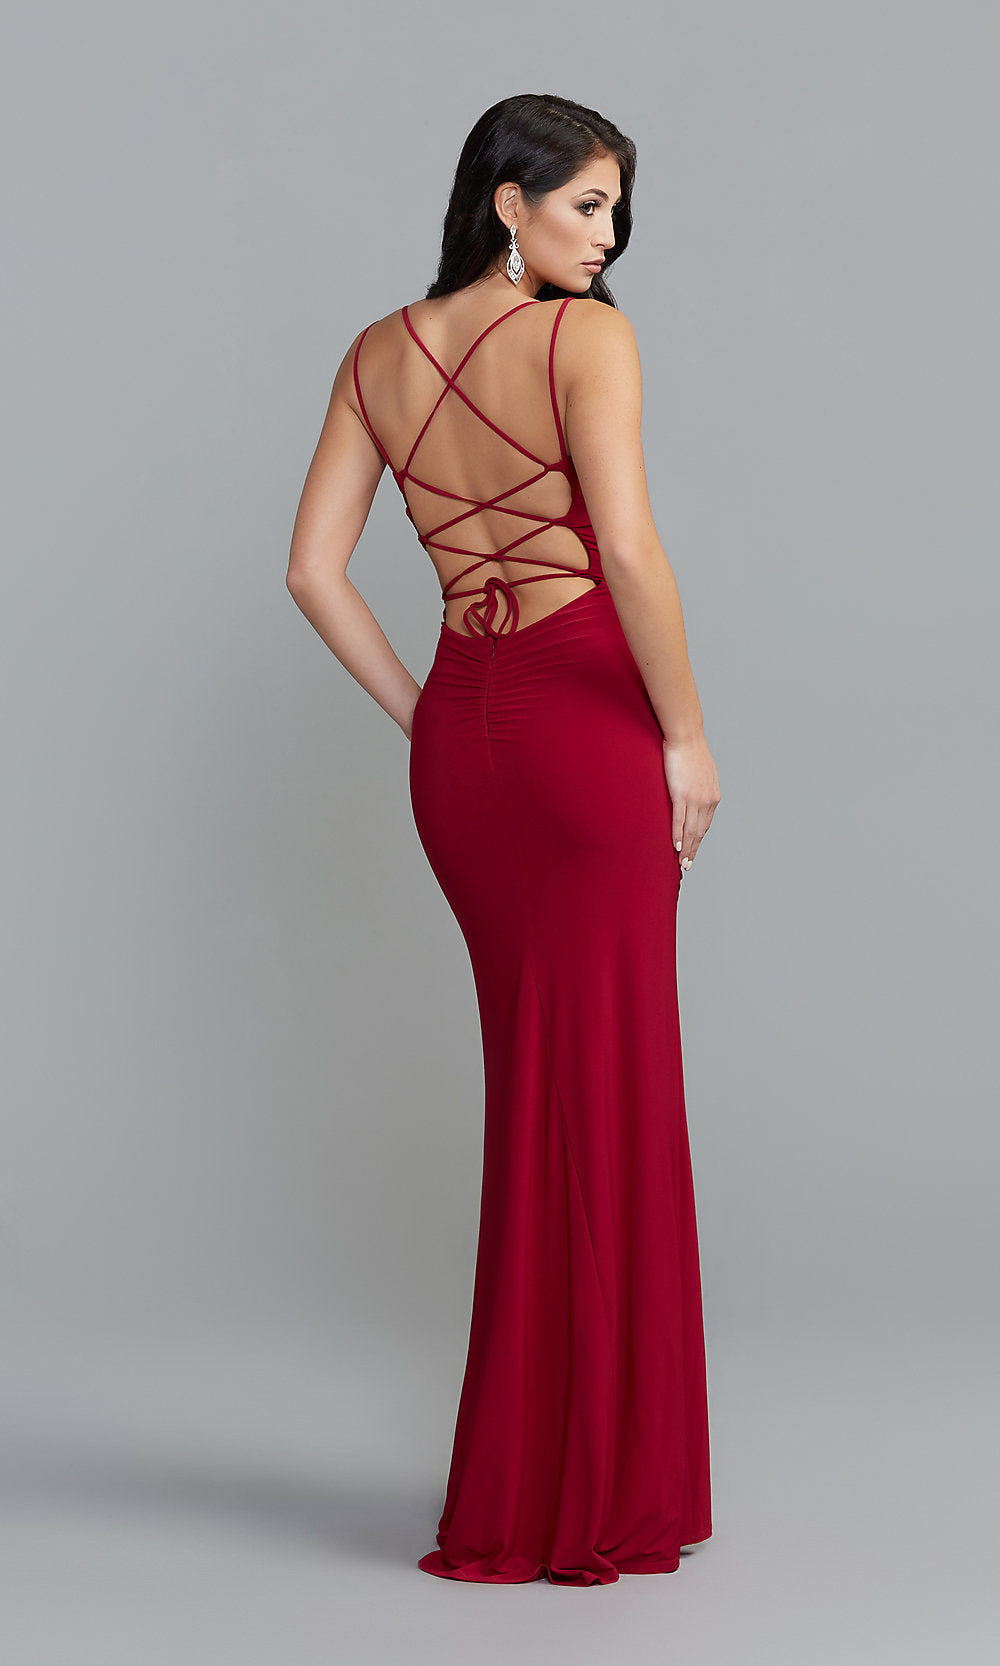  Strappy-Back Jump Long Red Prom Dress with Ruching